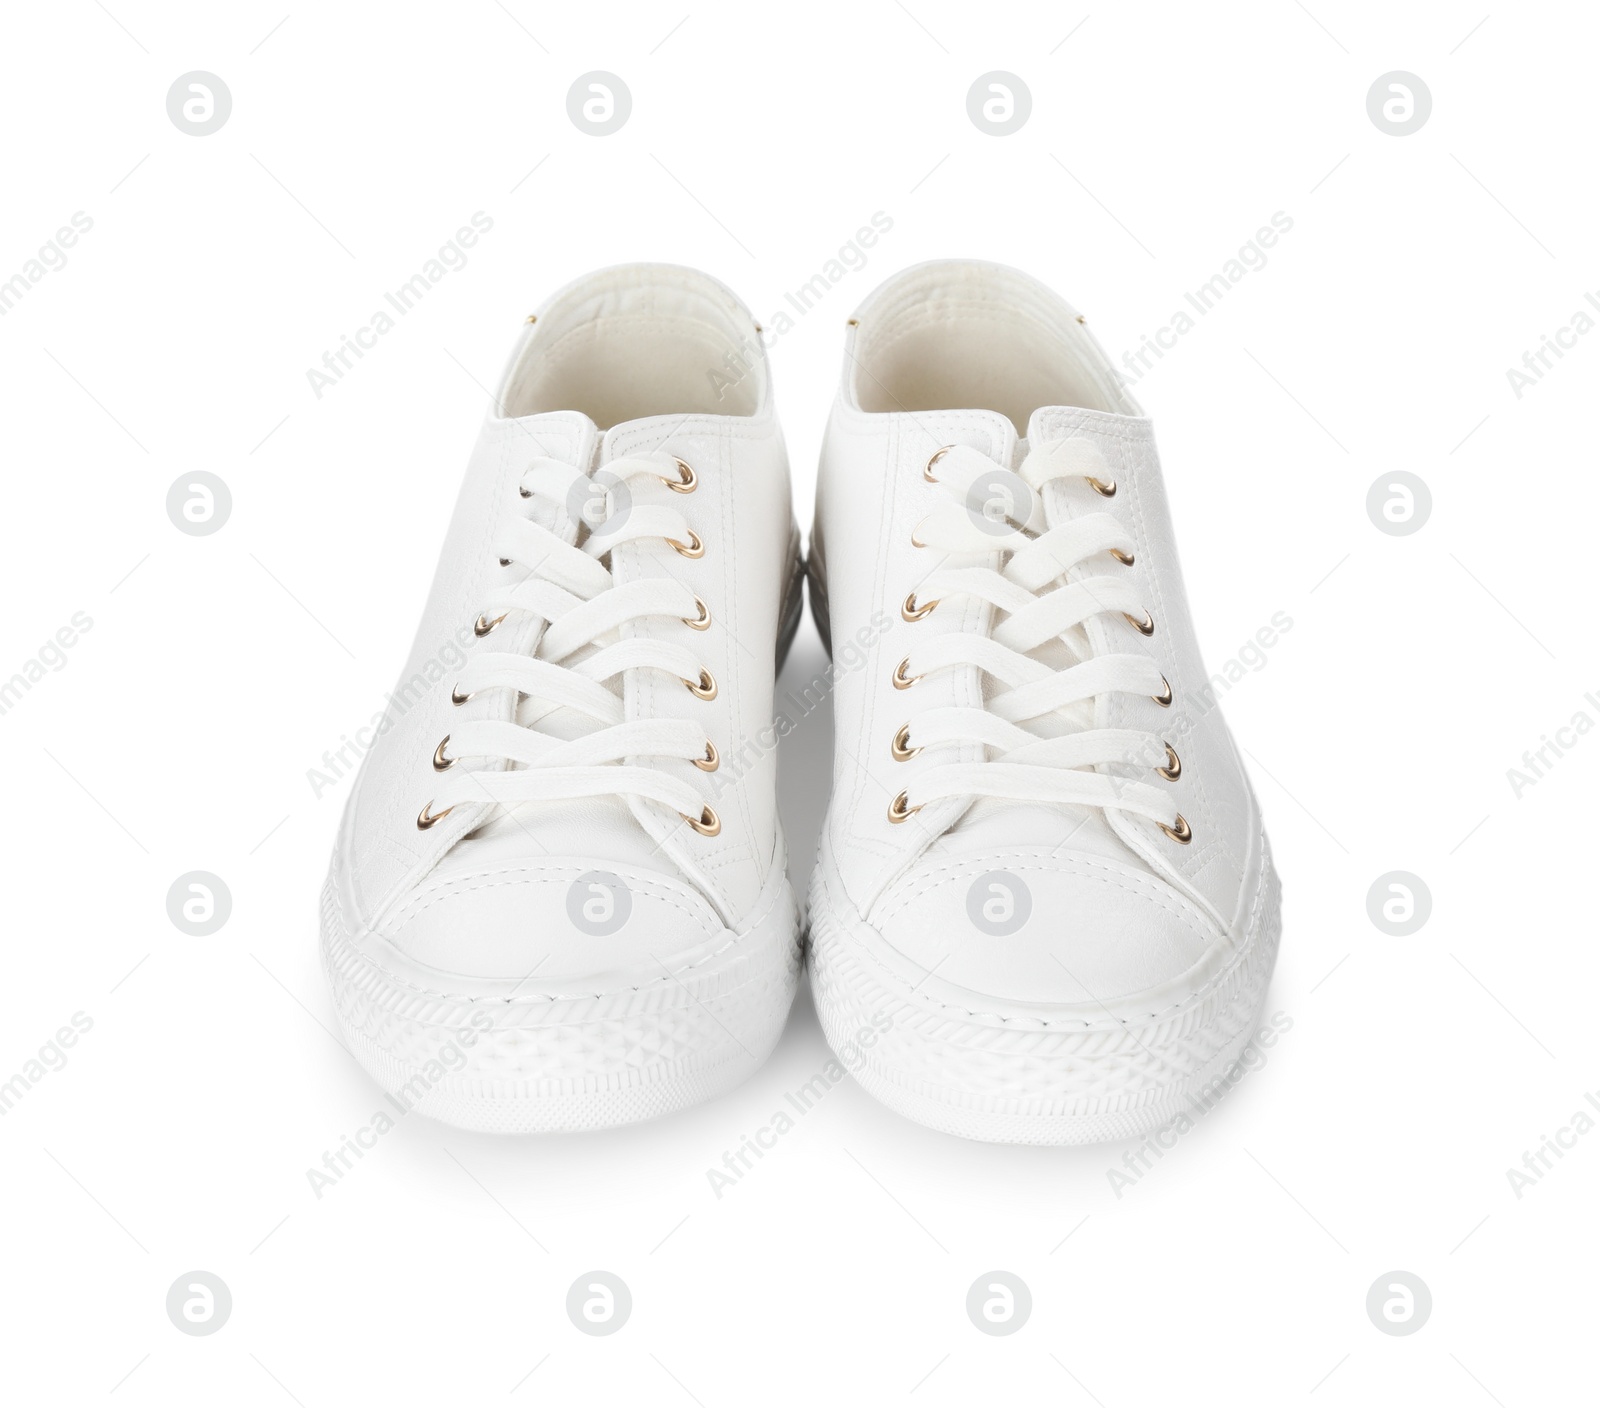 Photo of Pair of stylish sneakers on white background